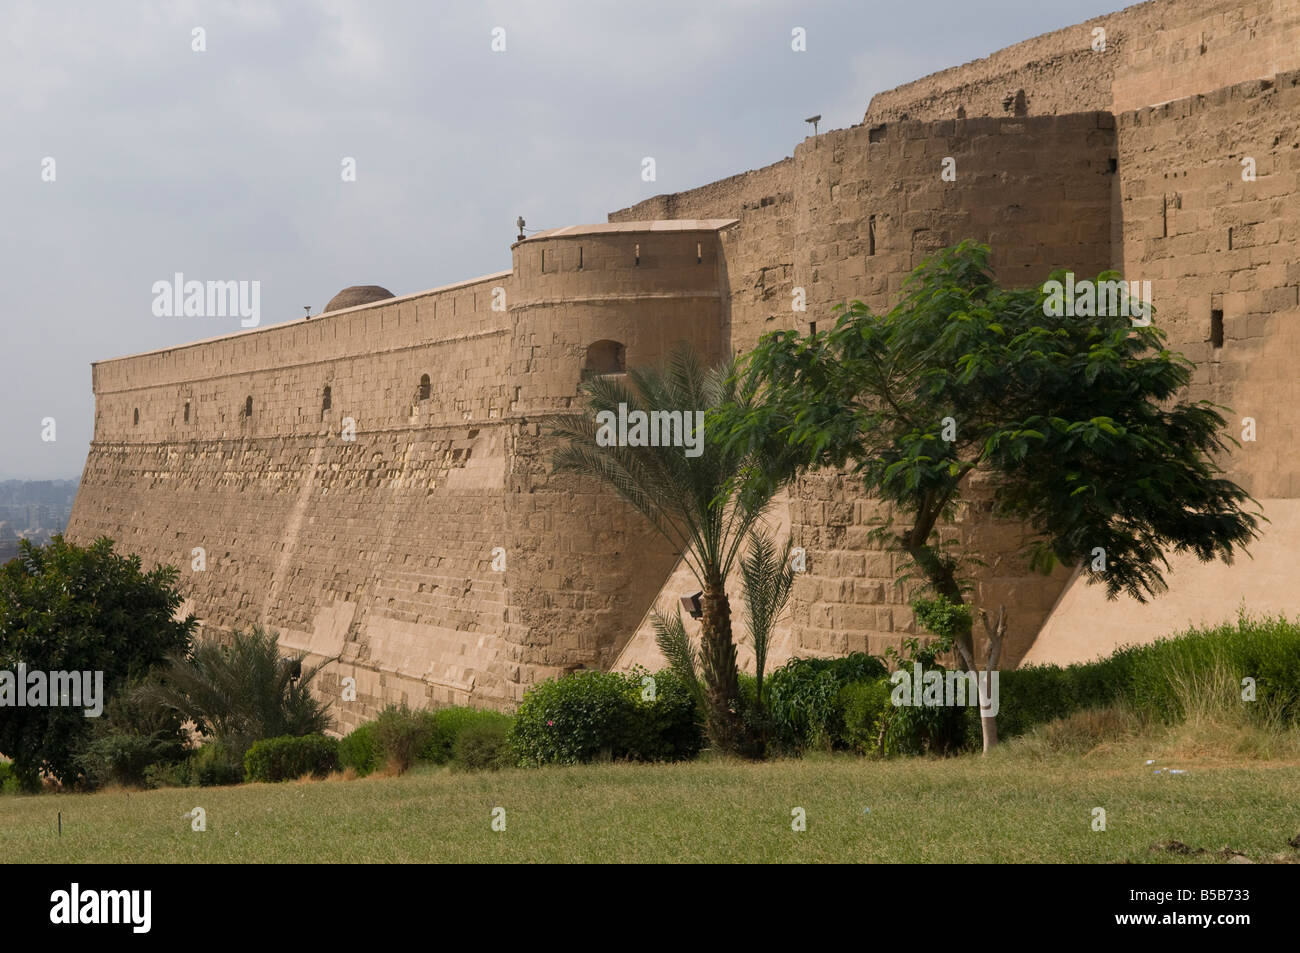 The external walls of Saladin or Salaḥ ad-Dīn Citadel a medieval Islamic fortification located on Mokattam hill in Cairo, Egypt Stock Photo